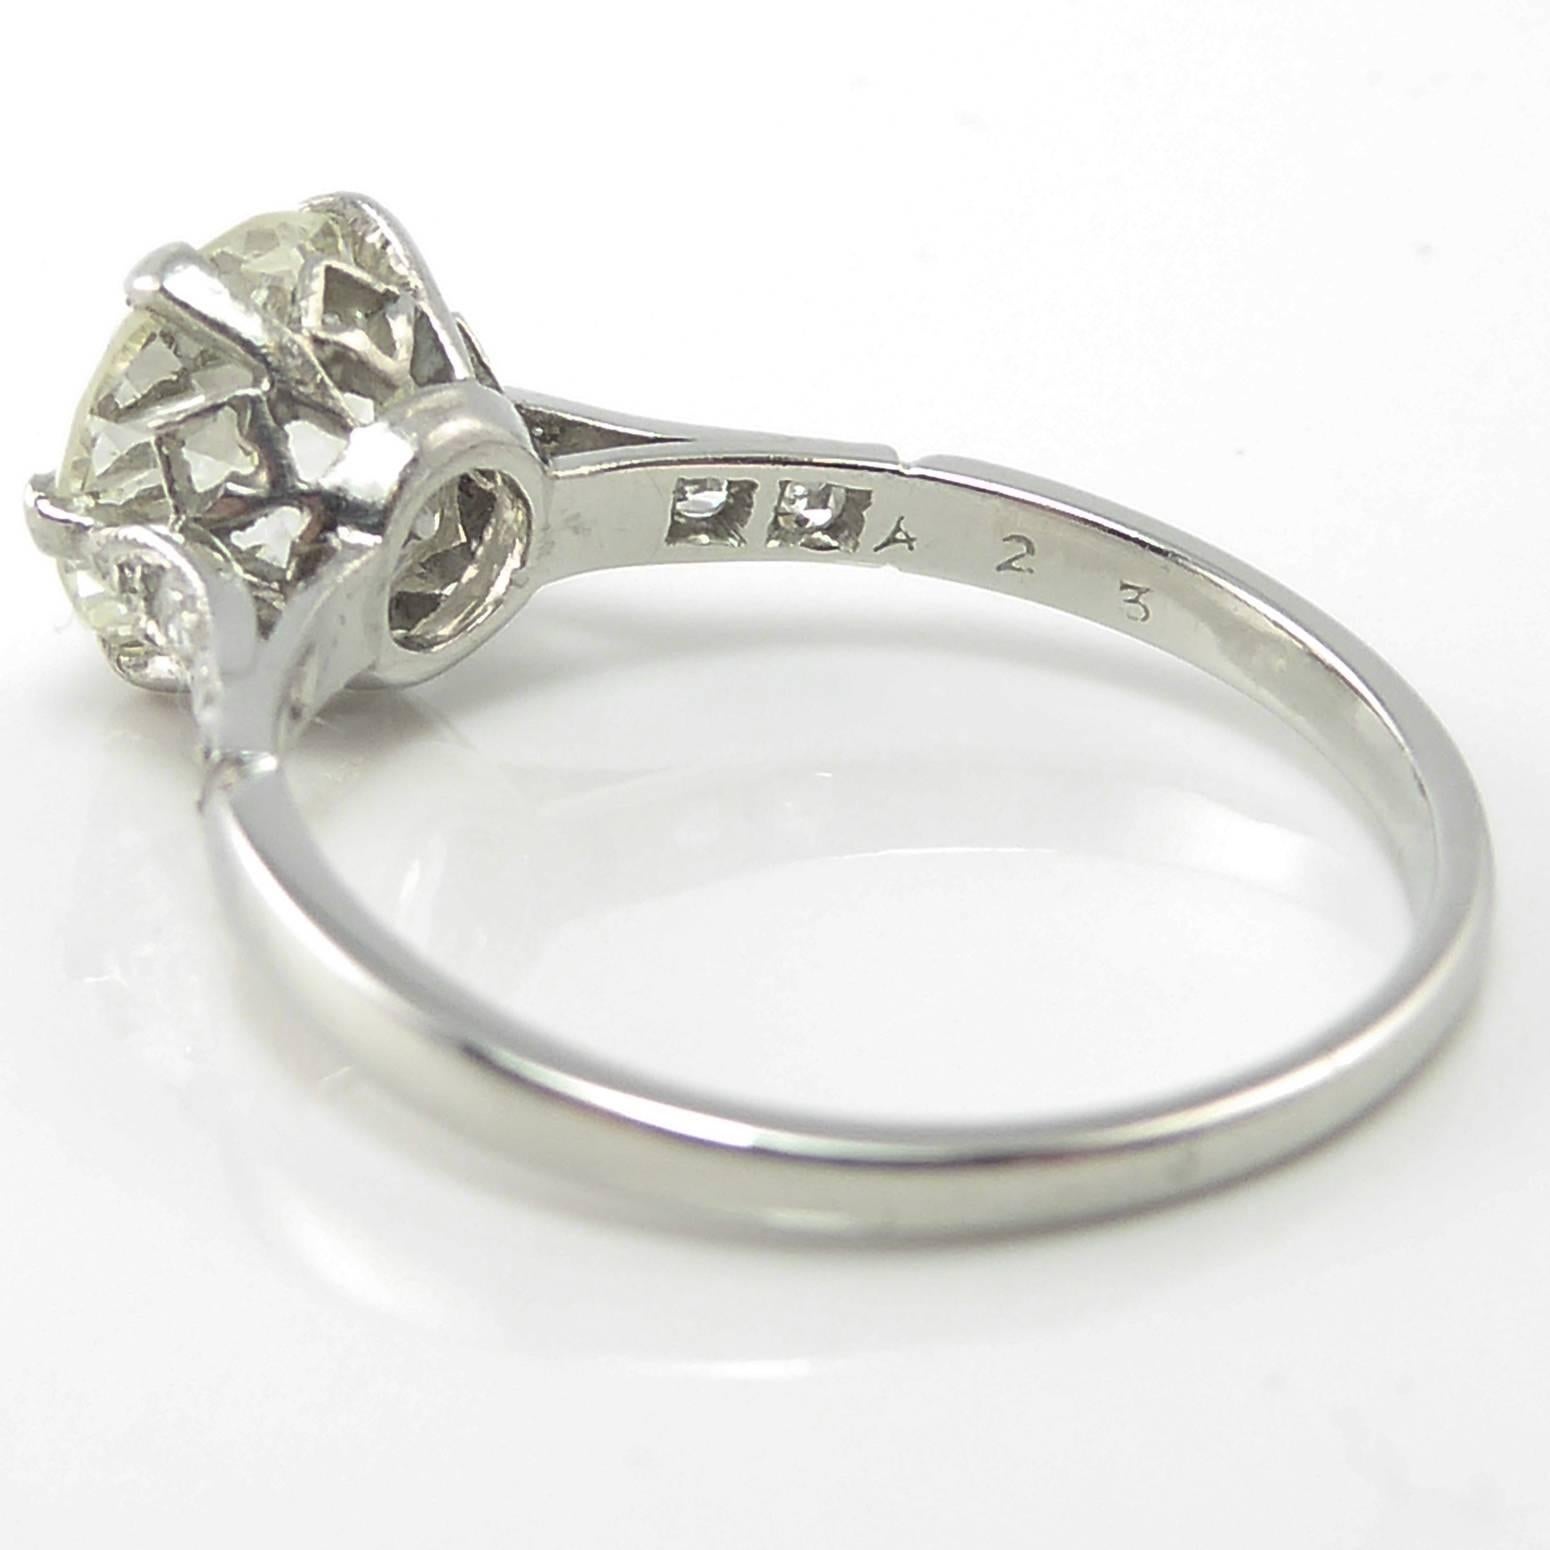 Details
1 x old European cut diamond
1.86ct, 7.70mm x 7.72mm x4.72mm
VS1-VS2 clarity, J-K colour
Band tests as platinum
Finger size 5 1/2 (US/Canada); L (UK/Australia)
Resizing available

Classic and elegant old European cut diamond engagement ring.